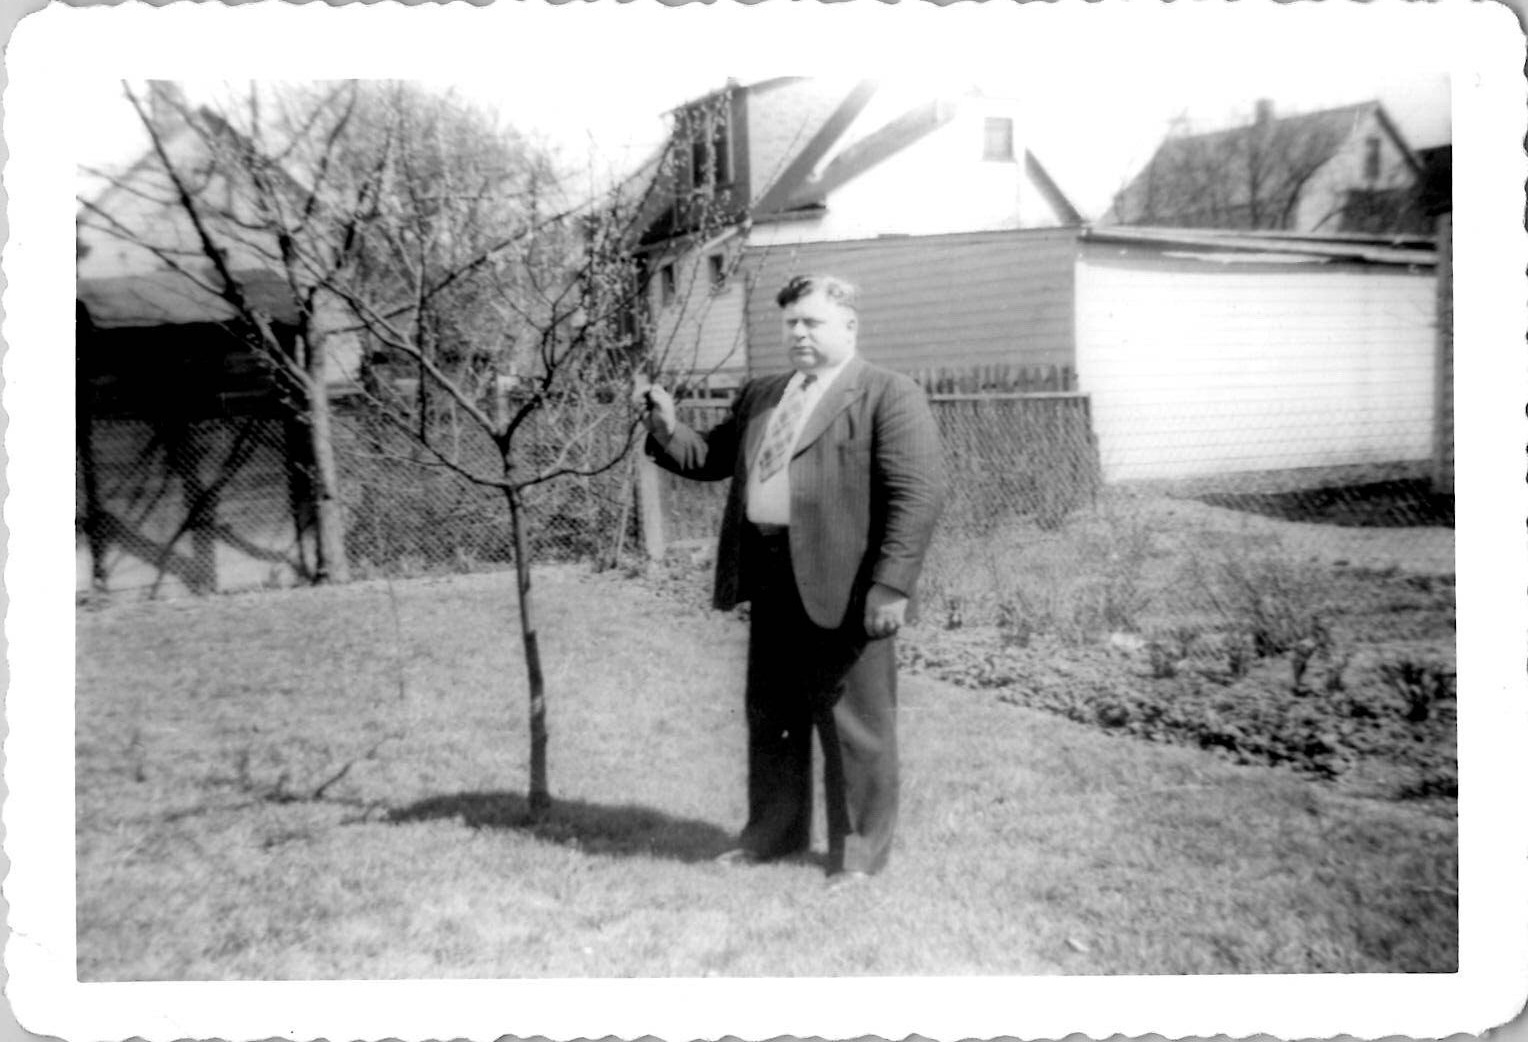 Fat Obese Man Wearing Tight Suit Posing with Tree Snapshot 1940s Vintage Photo